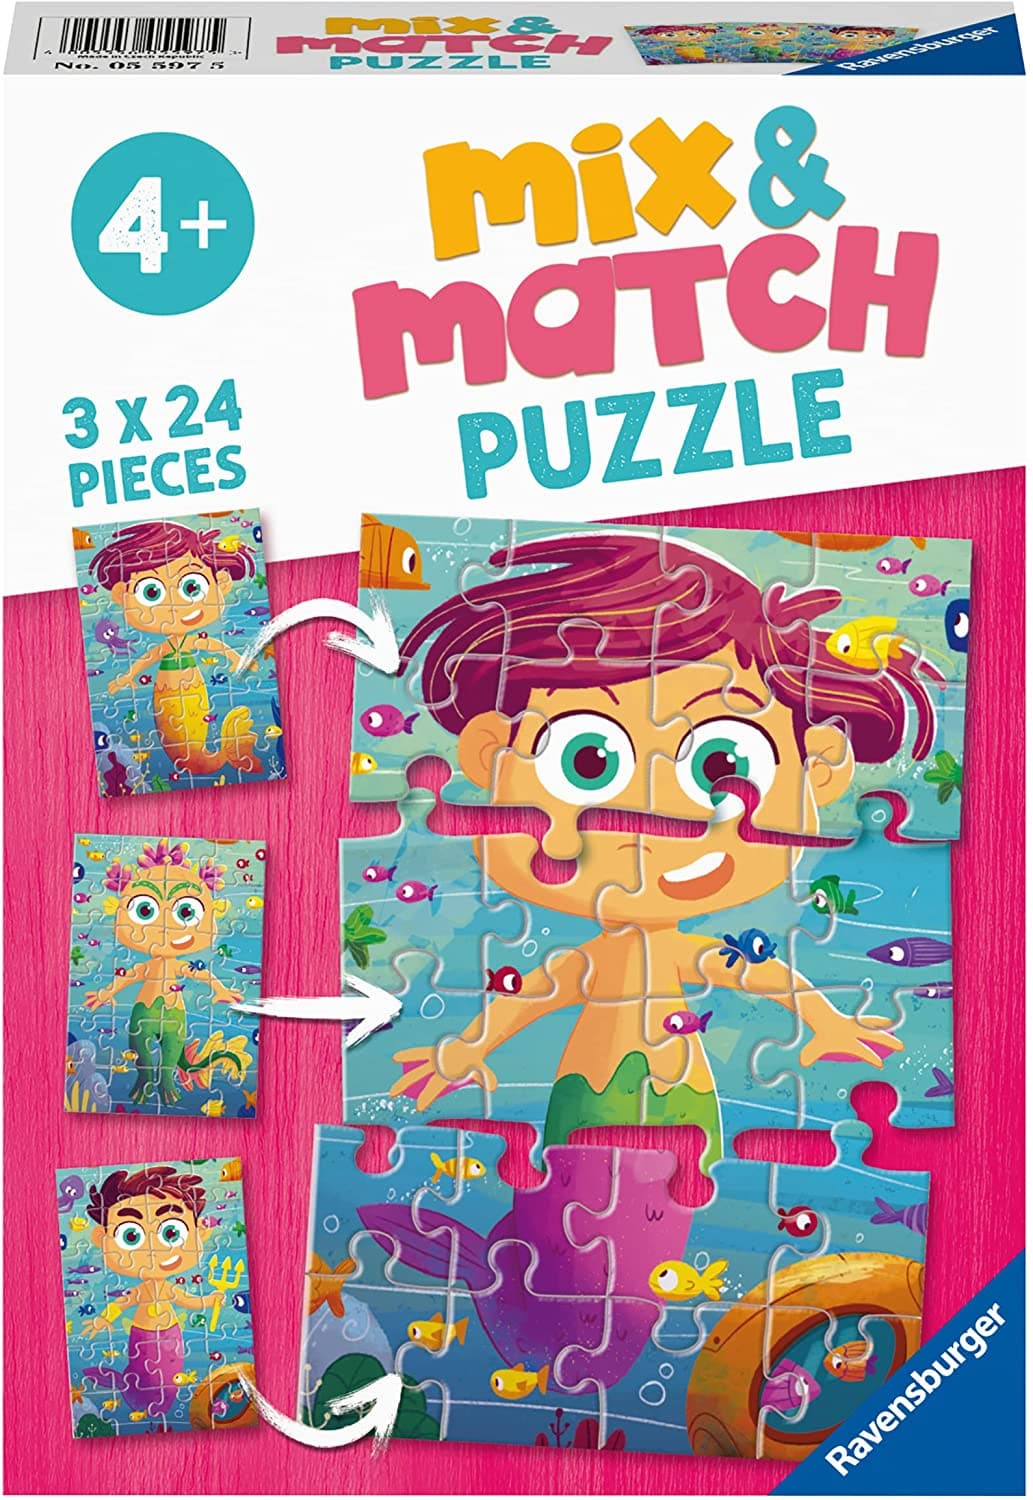 3 Puzzles Of 24 Pieces Mix & Match Little Mermaids And Sea Monsters